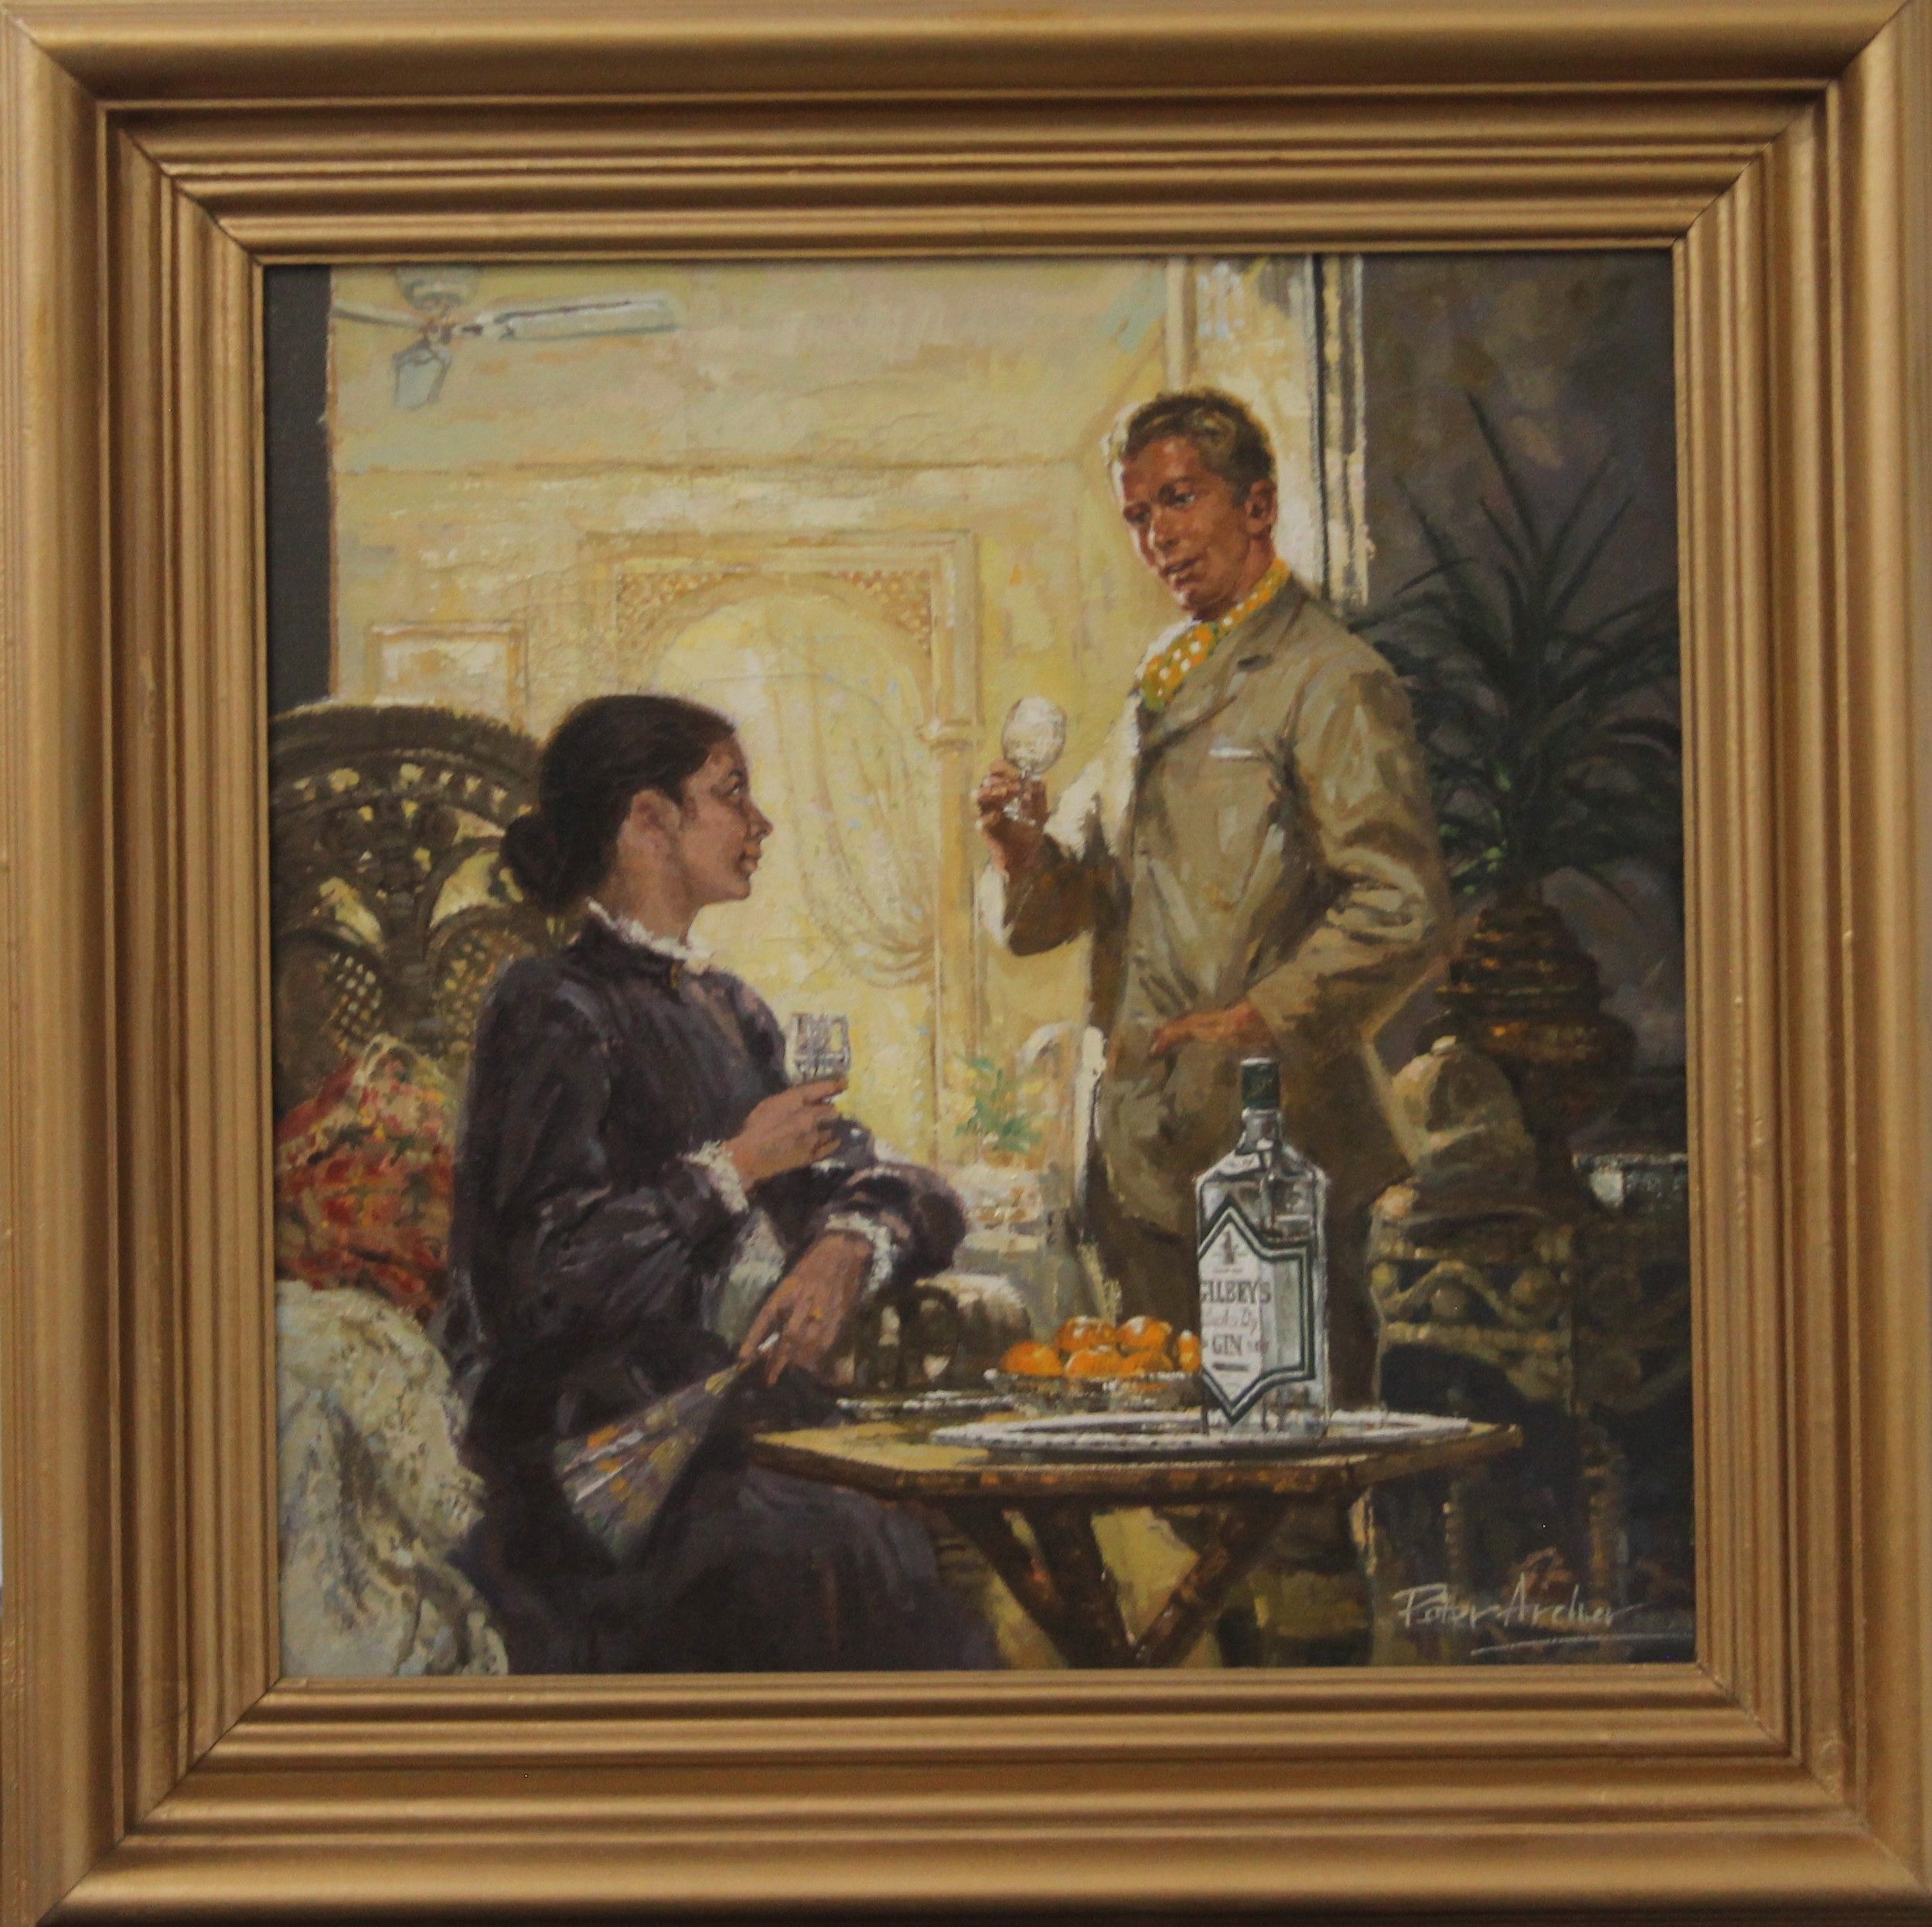 PETER ARCHER, The Gin Drinkers, oil on canvas, framed. 34 x 34 cm. - Image 2 of 3